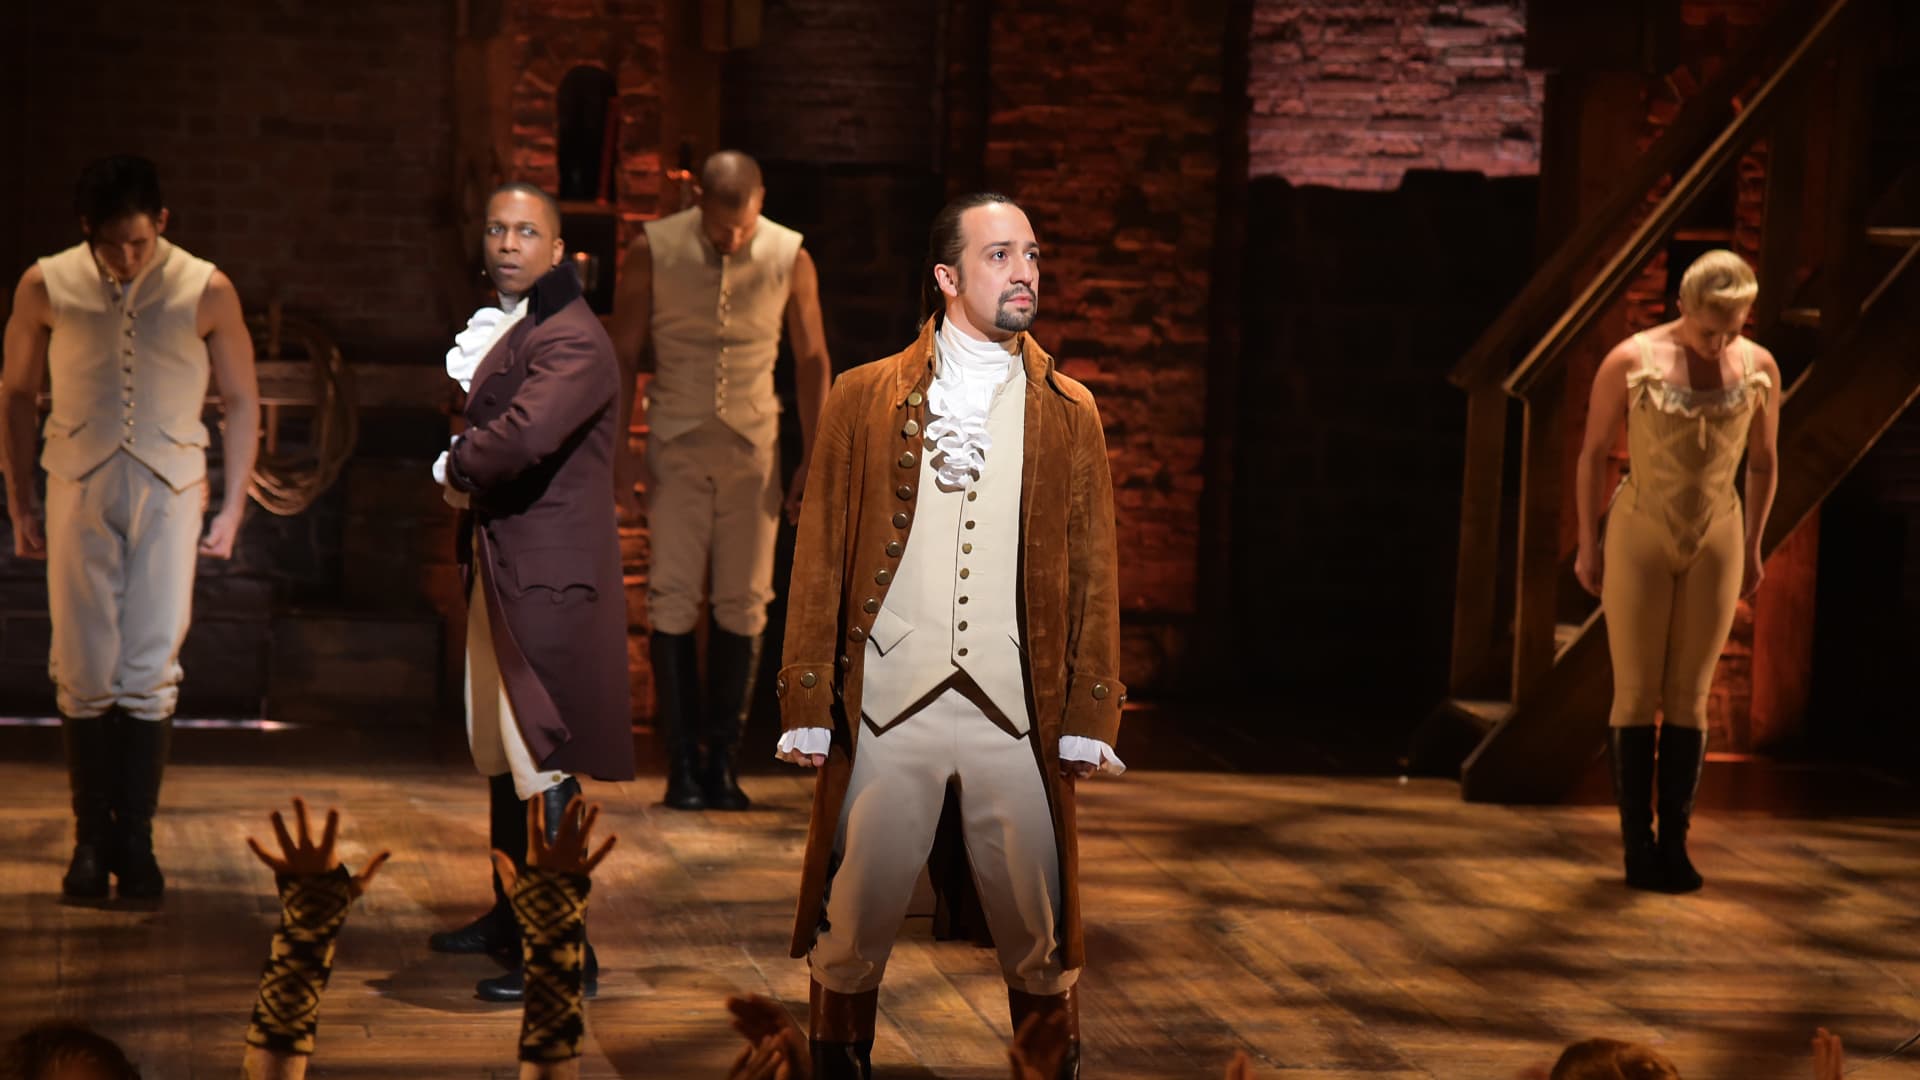 Actor Leslie Odom, Jr. (L) and actor, composer Lin-Manuel Miranda (R) and cast of 'Hamilton' perform on stage during 'Hamilton' GRAMMY performance for The 58th GRAMMY Awards at Richard Rodgers Theater in New York City.